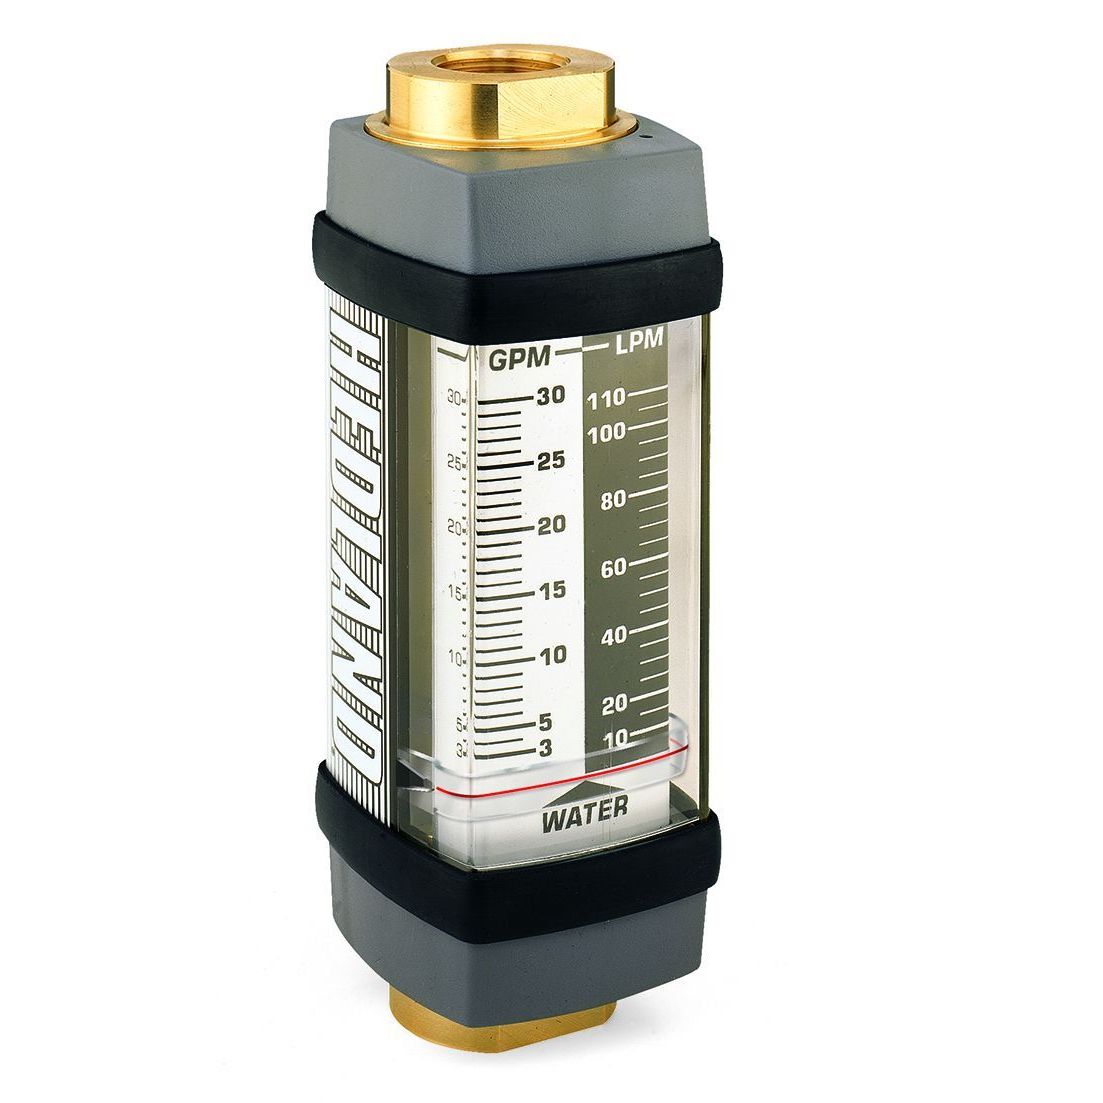 H704B-030 : Hedland 3500psi Brass Flow Meter for Water, #12 SAE (3/4), 3 to 30 GPM